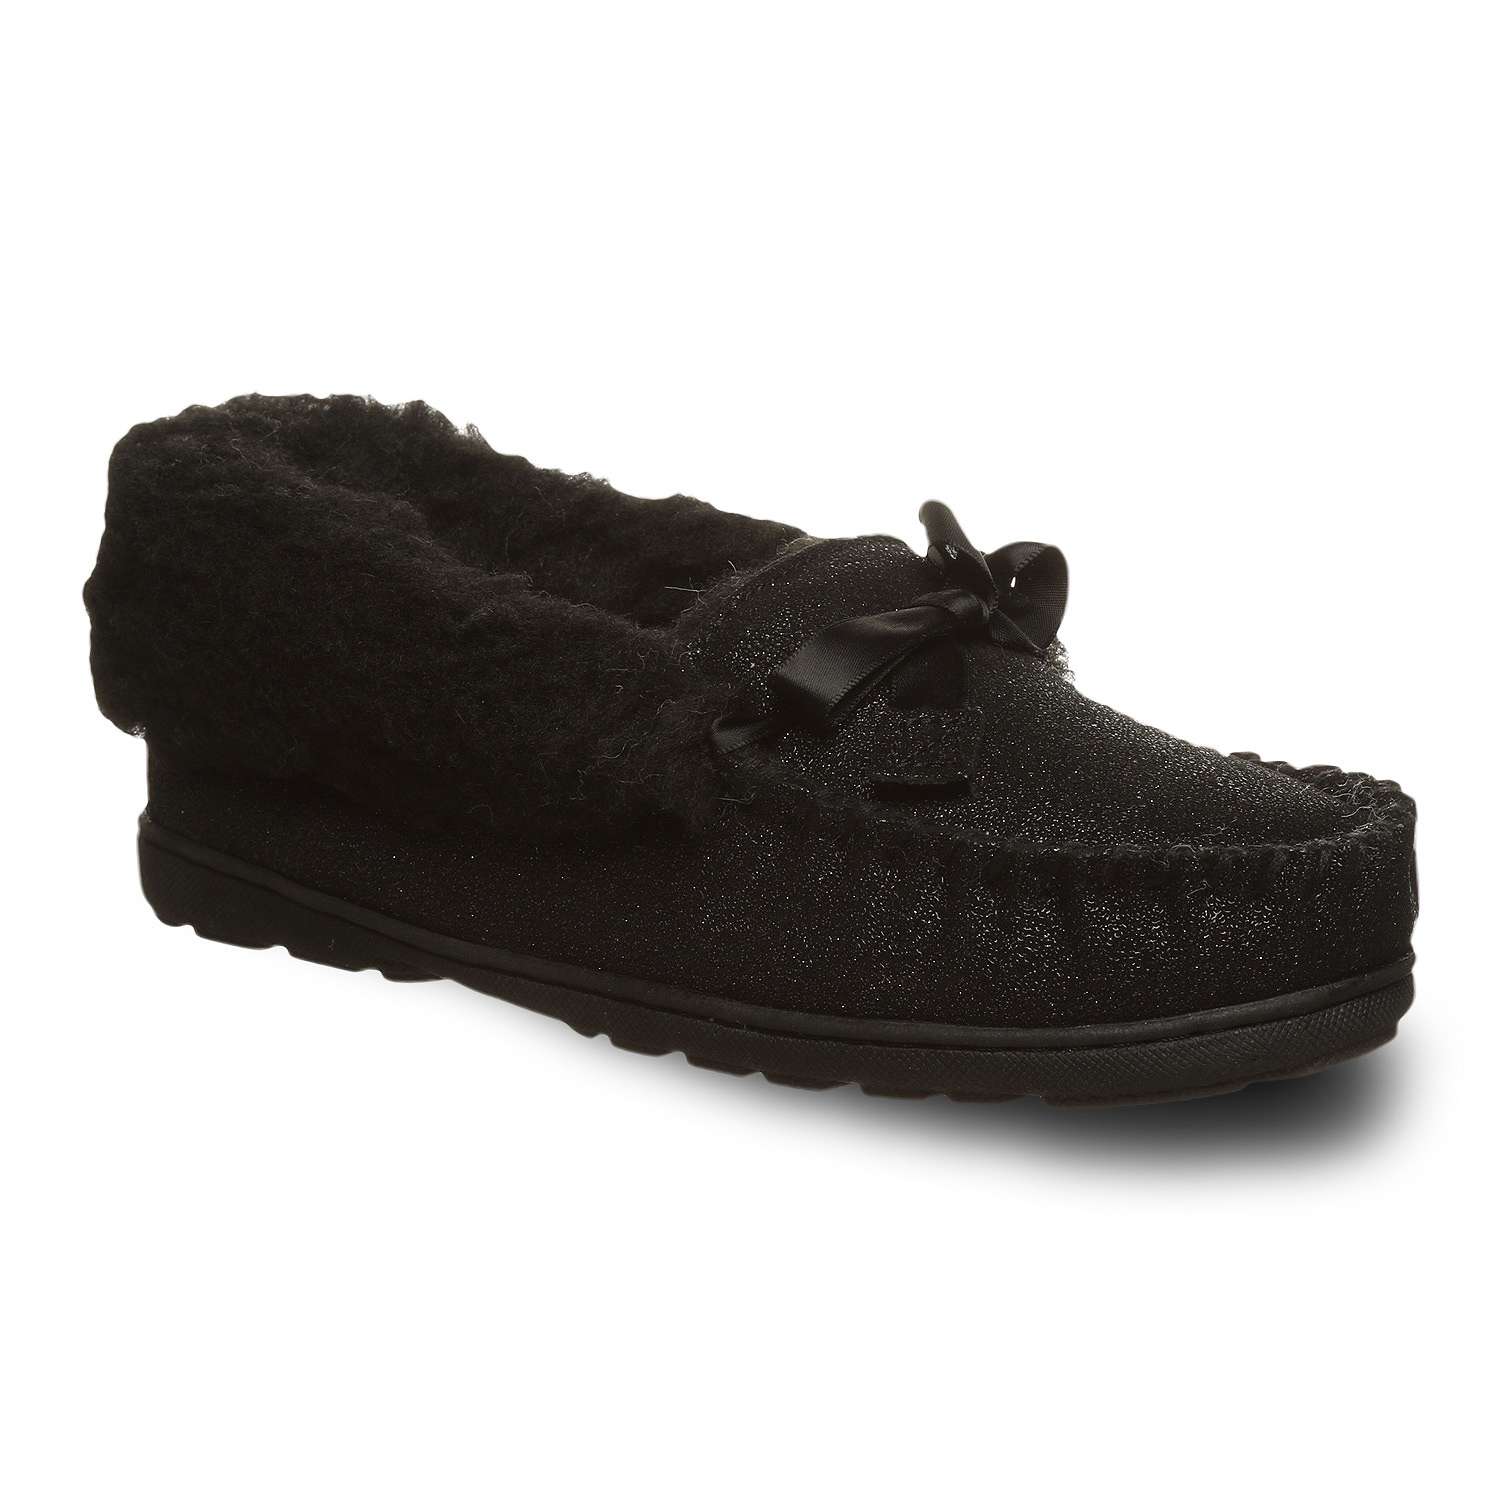 Bearpaw Indio Exotic Women's Suede Moccasin Slippers